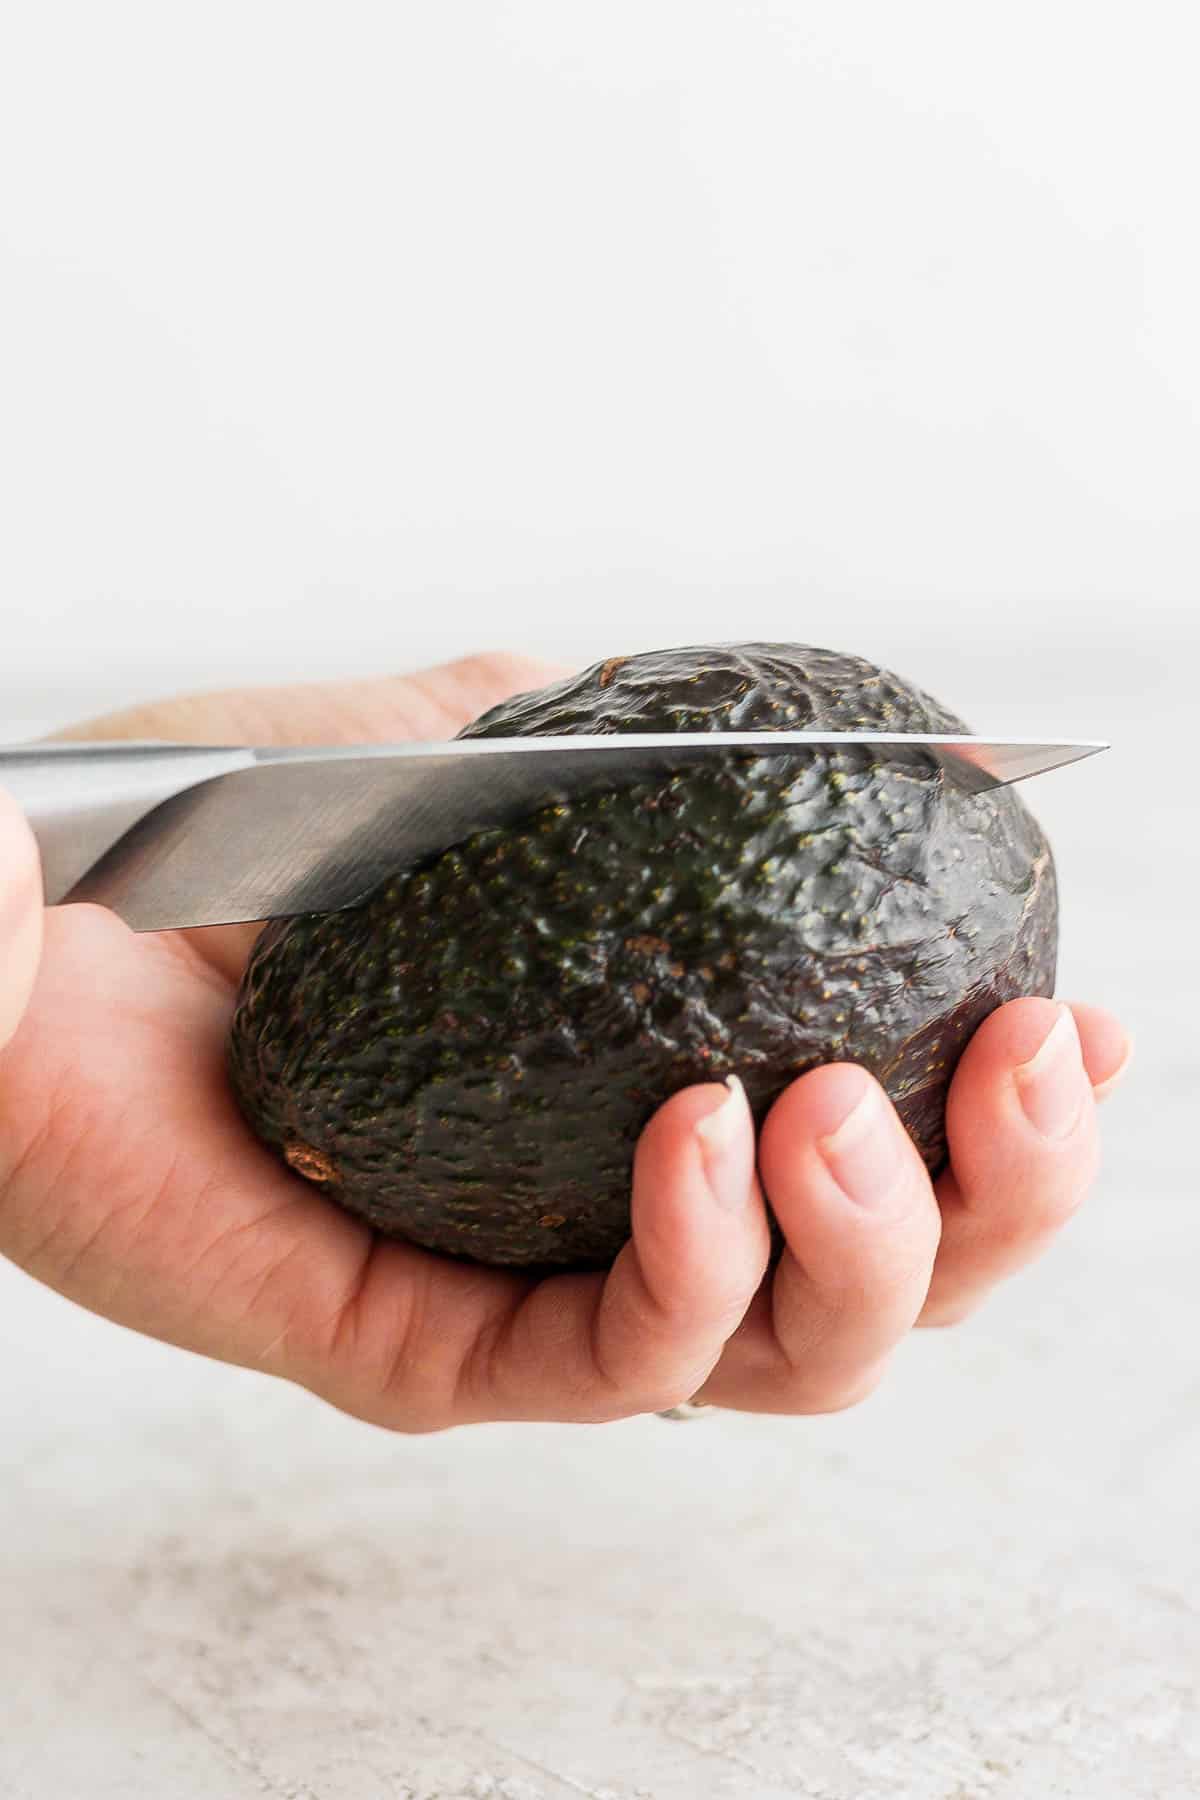 A hand holding an avocado and a knife down the middle.